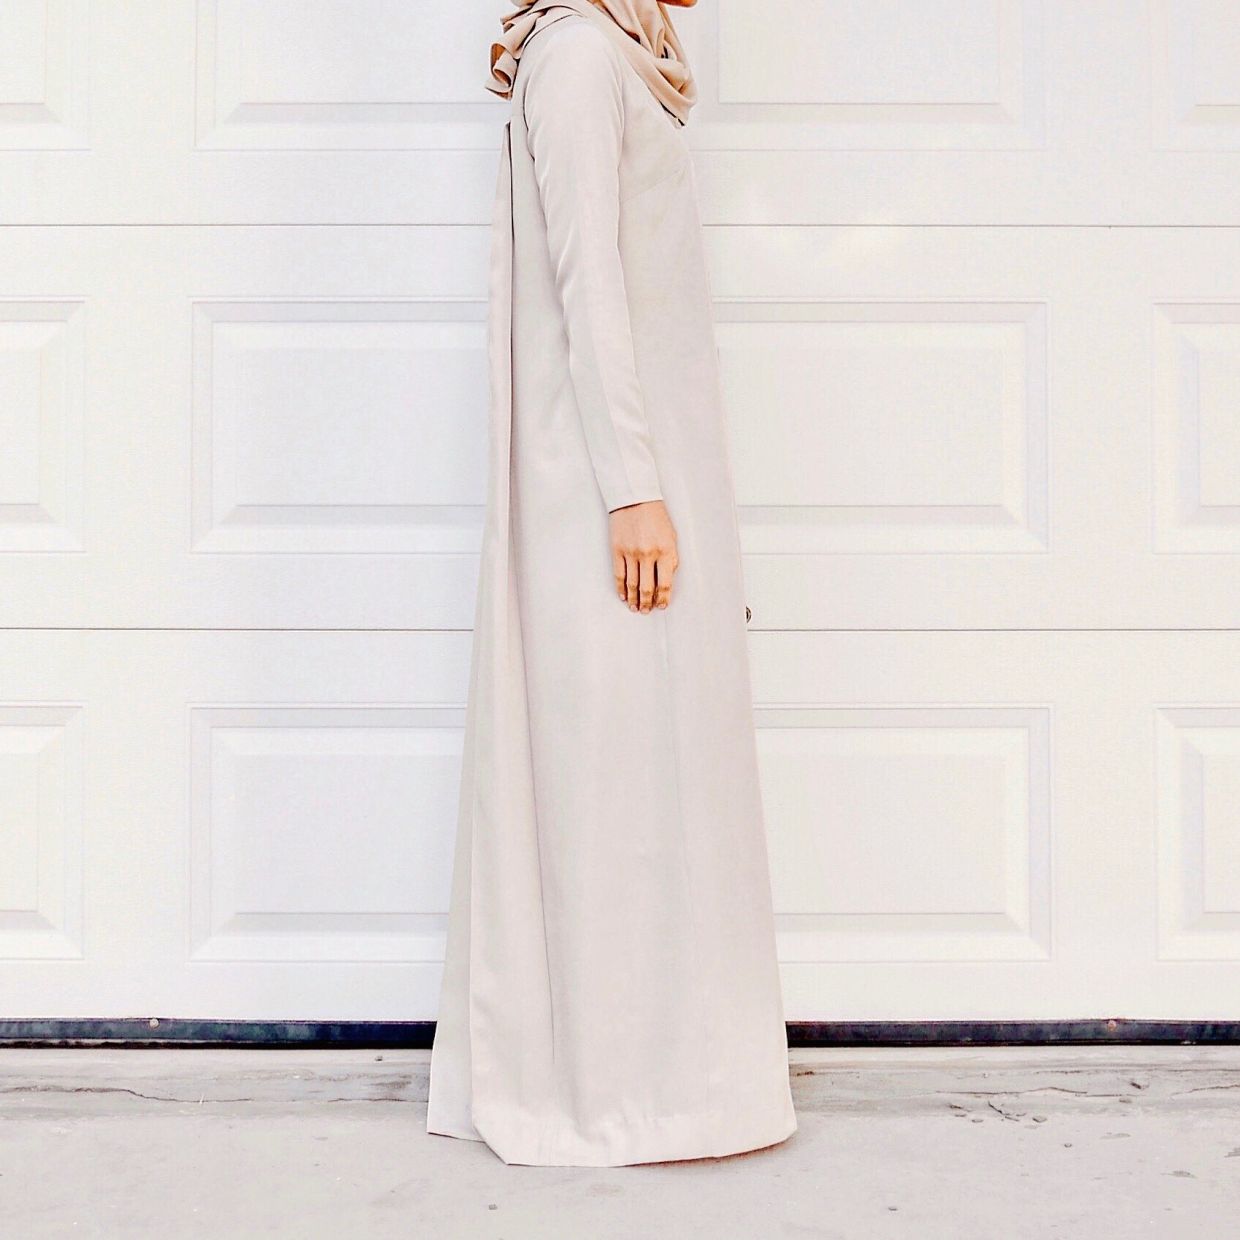 Modest wear is trendy and not just about covering up, says Malaysian  designers